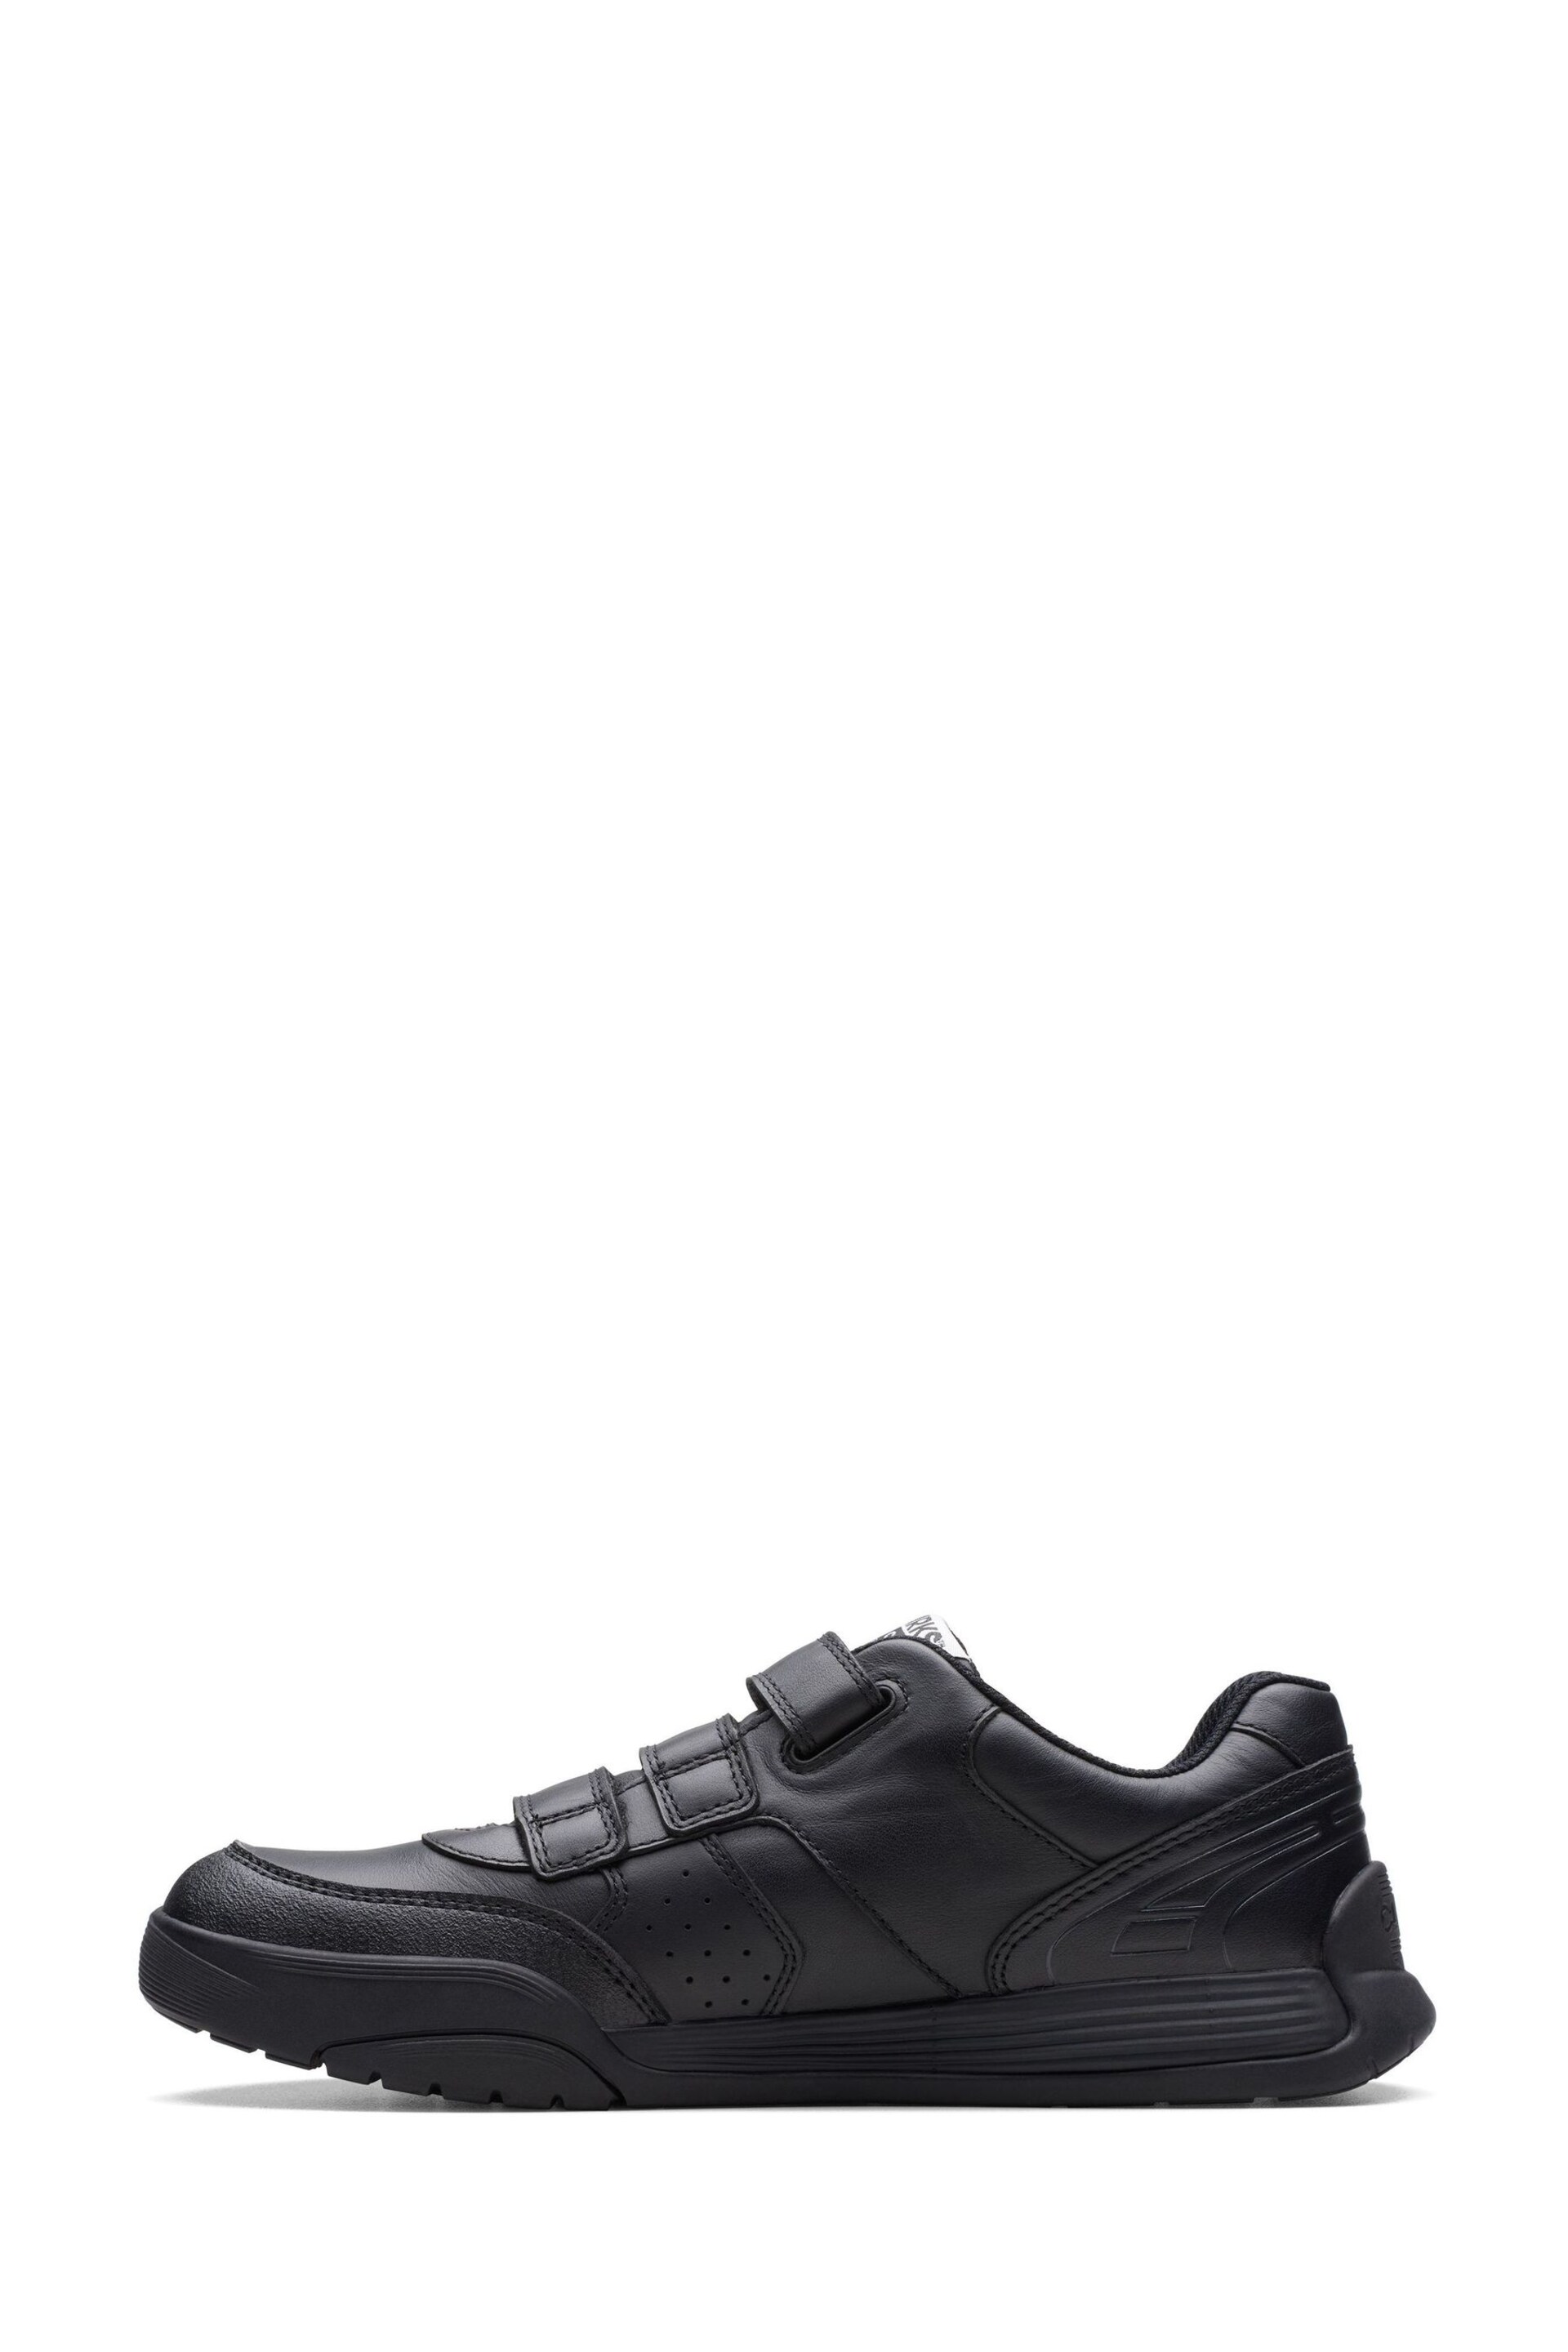 Clarks Black Multi Fit Cica Star Orb Trainers - Image 2 of 7